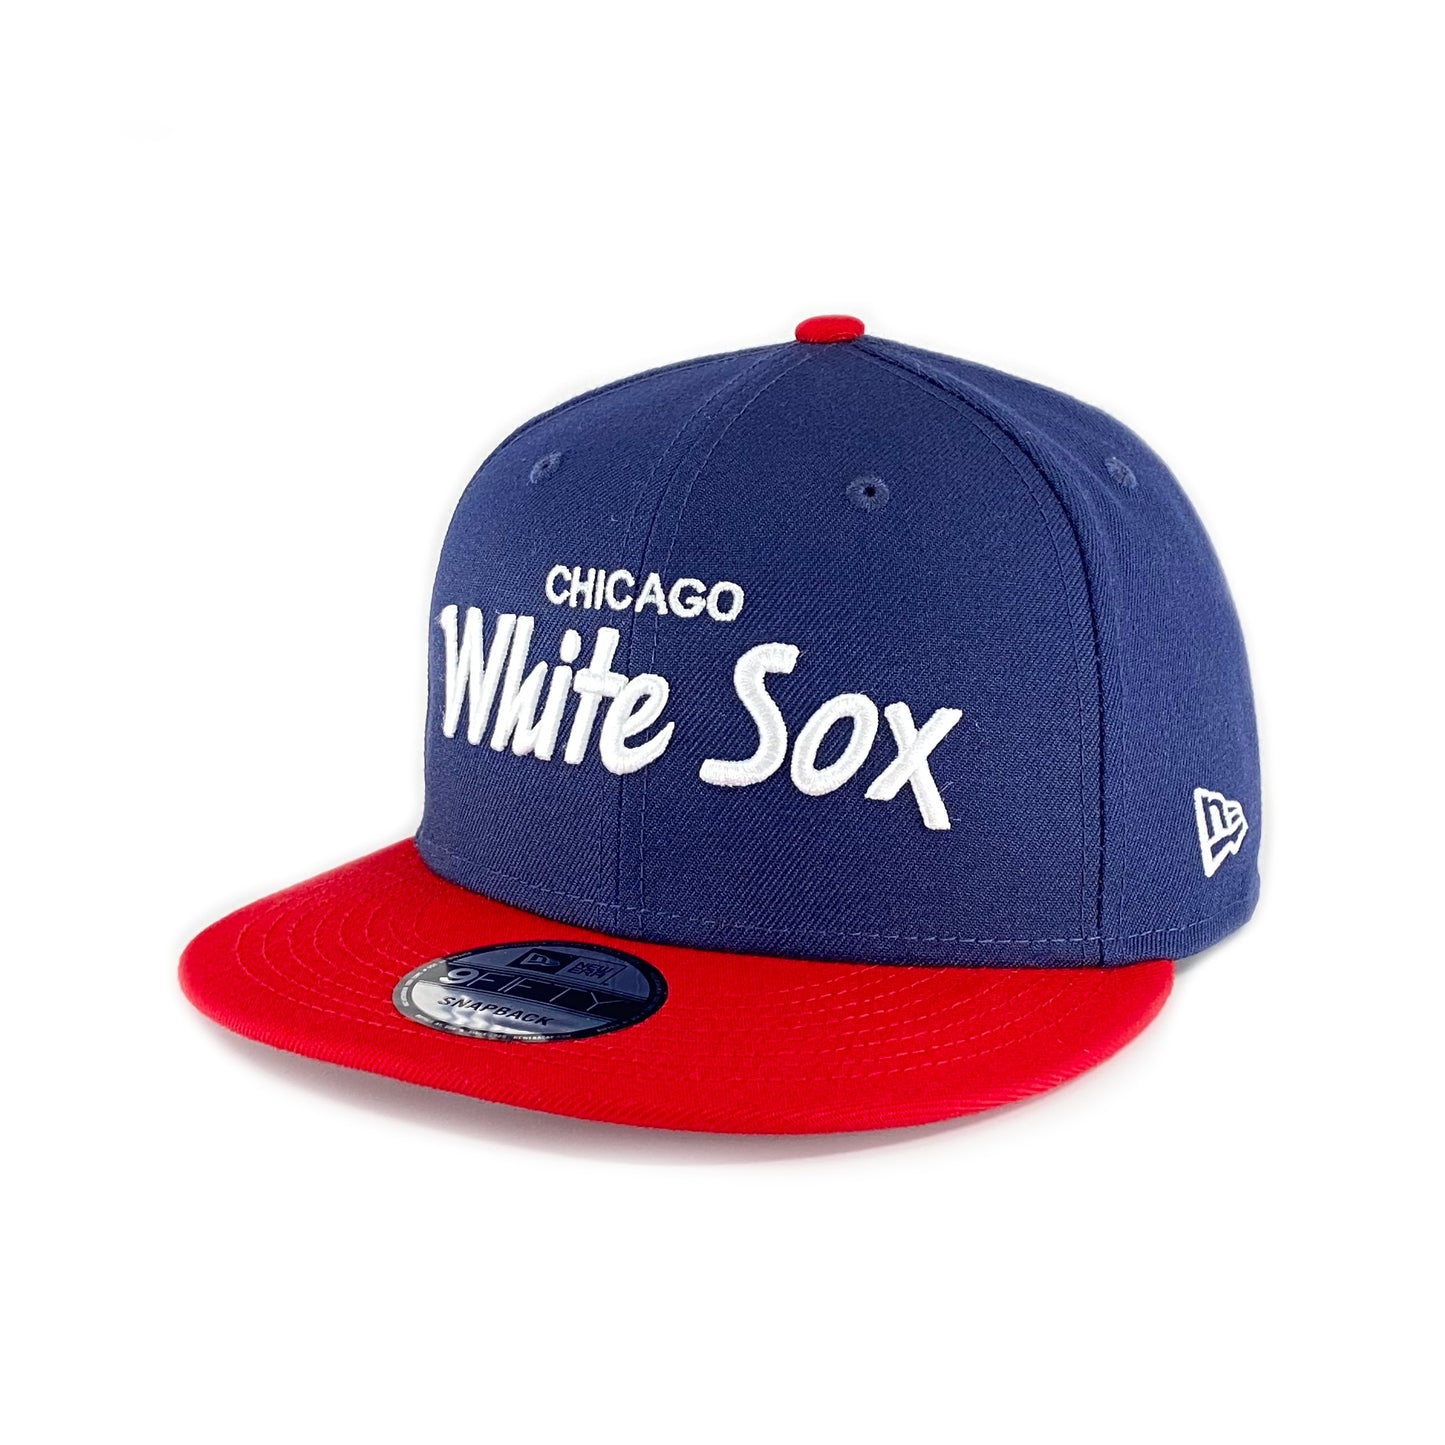 Chicago White Sox Chase Script Navy/Red New Era 9FIFTY Snapback Hat